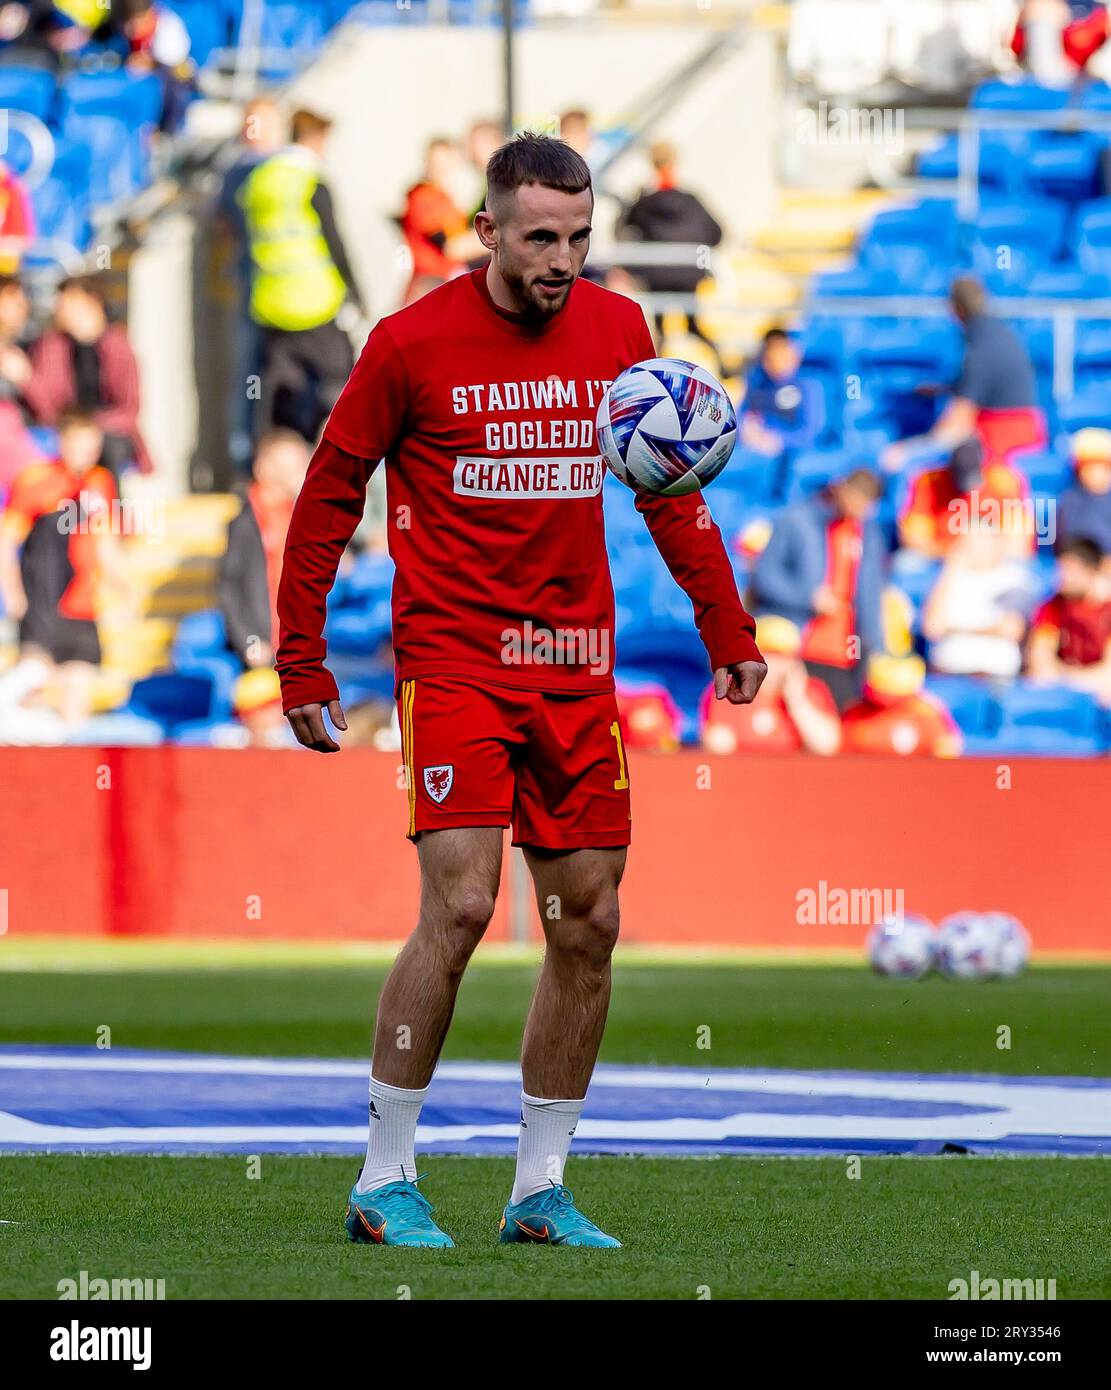 Cardiff, Wales  - 11 June 2022: Wales Rhys Norrington-Davies prior to the UEFA Nations League fixture between Wales and Belgium at the Cardiff City S Stock Photo